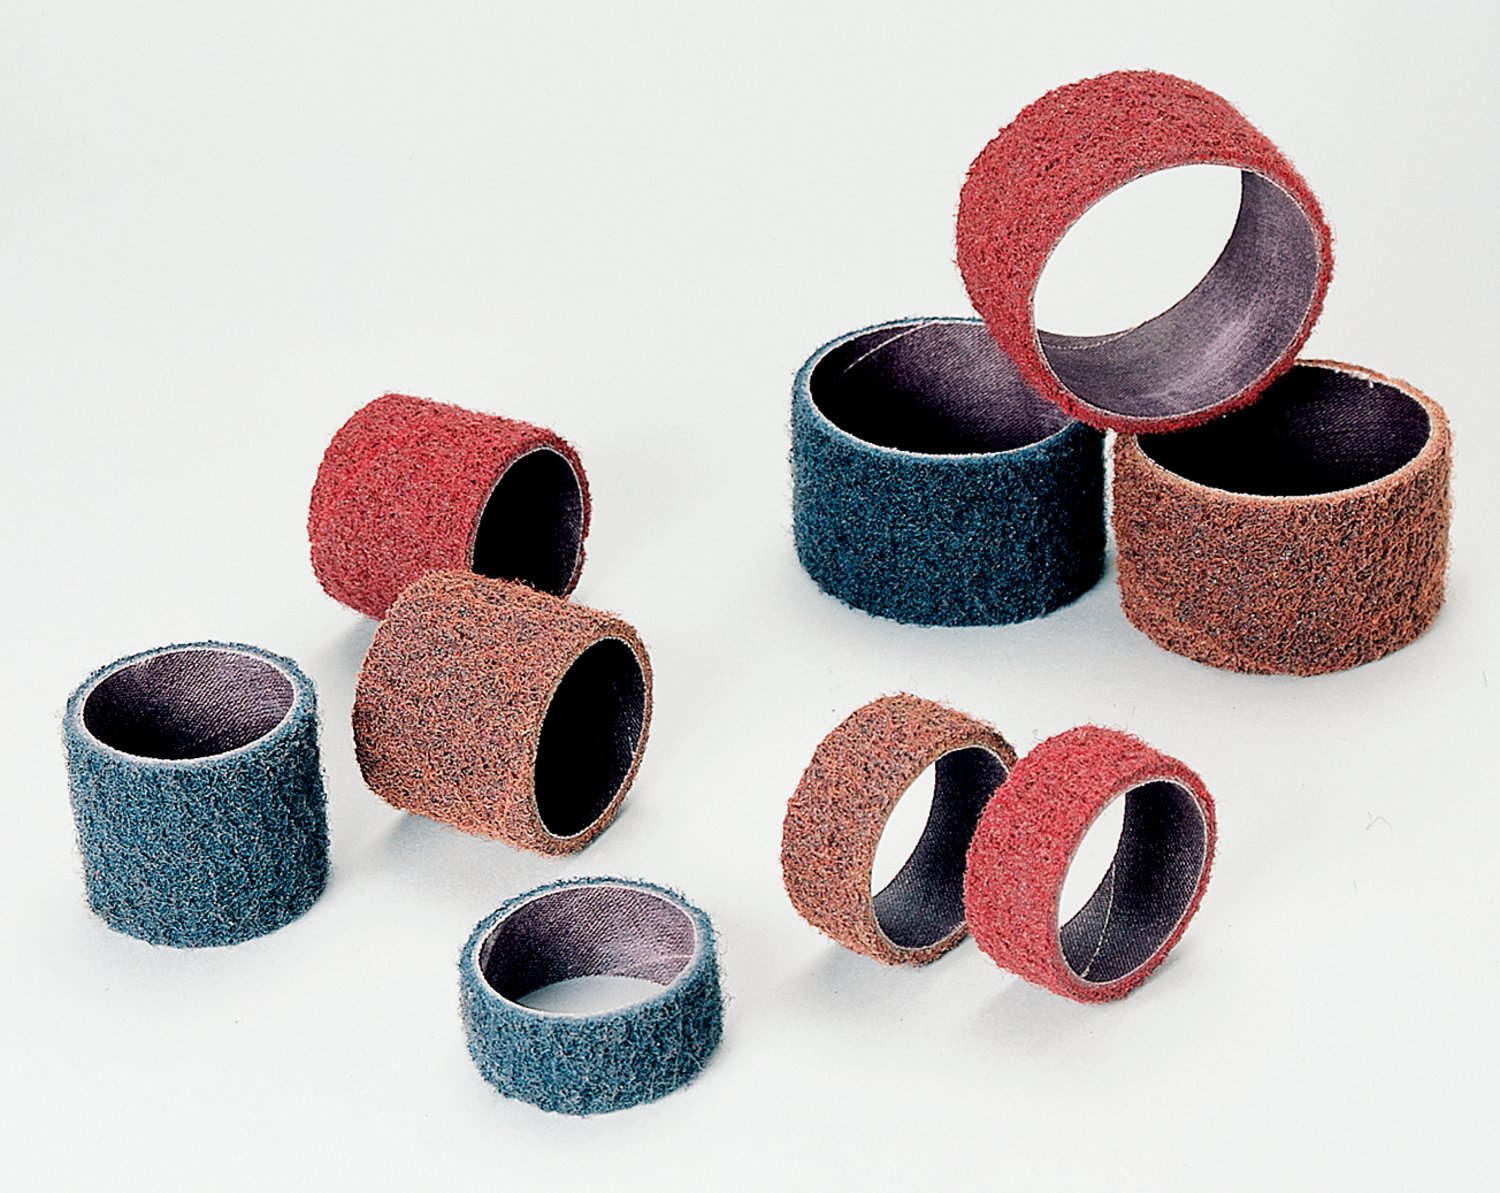 7100019300 - Standard Abrasives Surface Conditioning Band 727085, 1/2 in x 1 in VFN,
10/Carton, 100 ea/Case